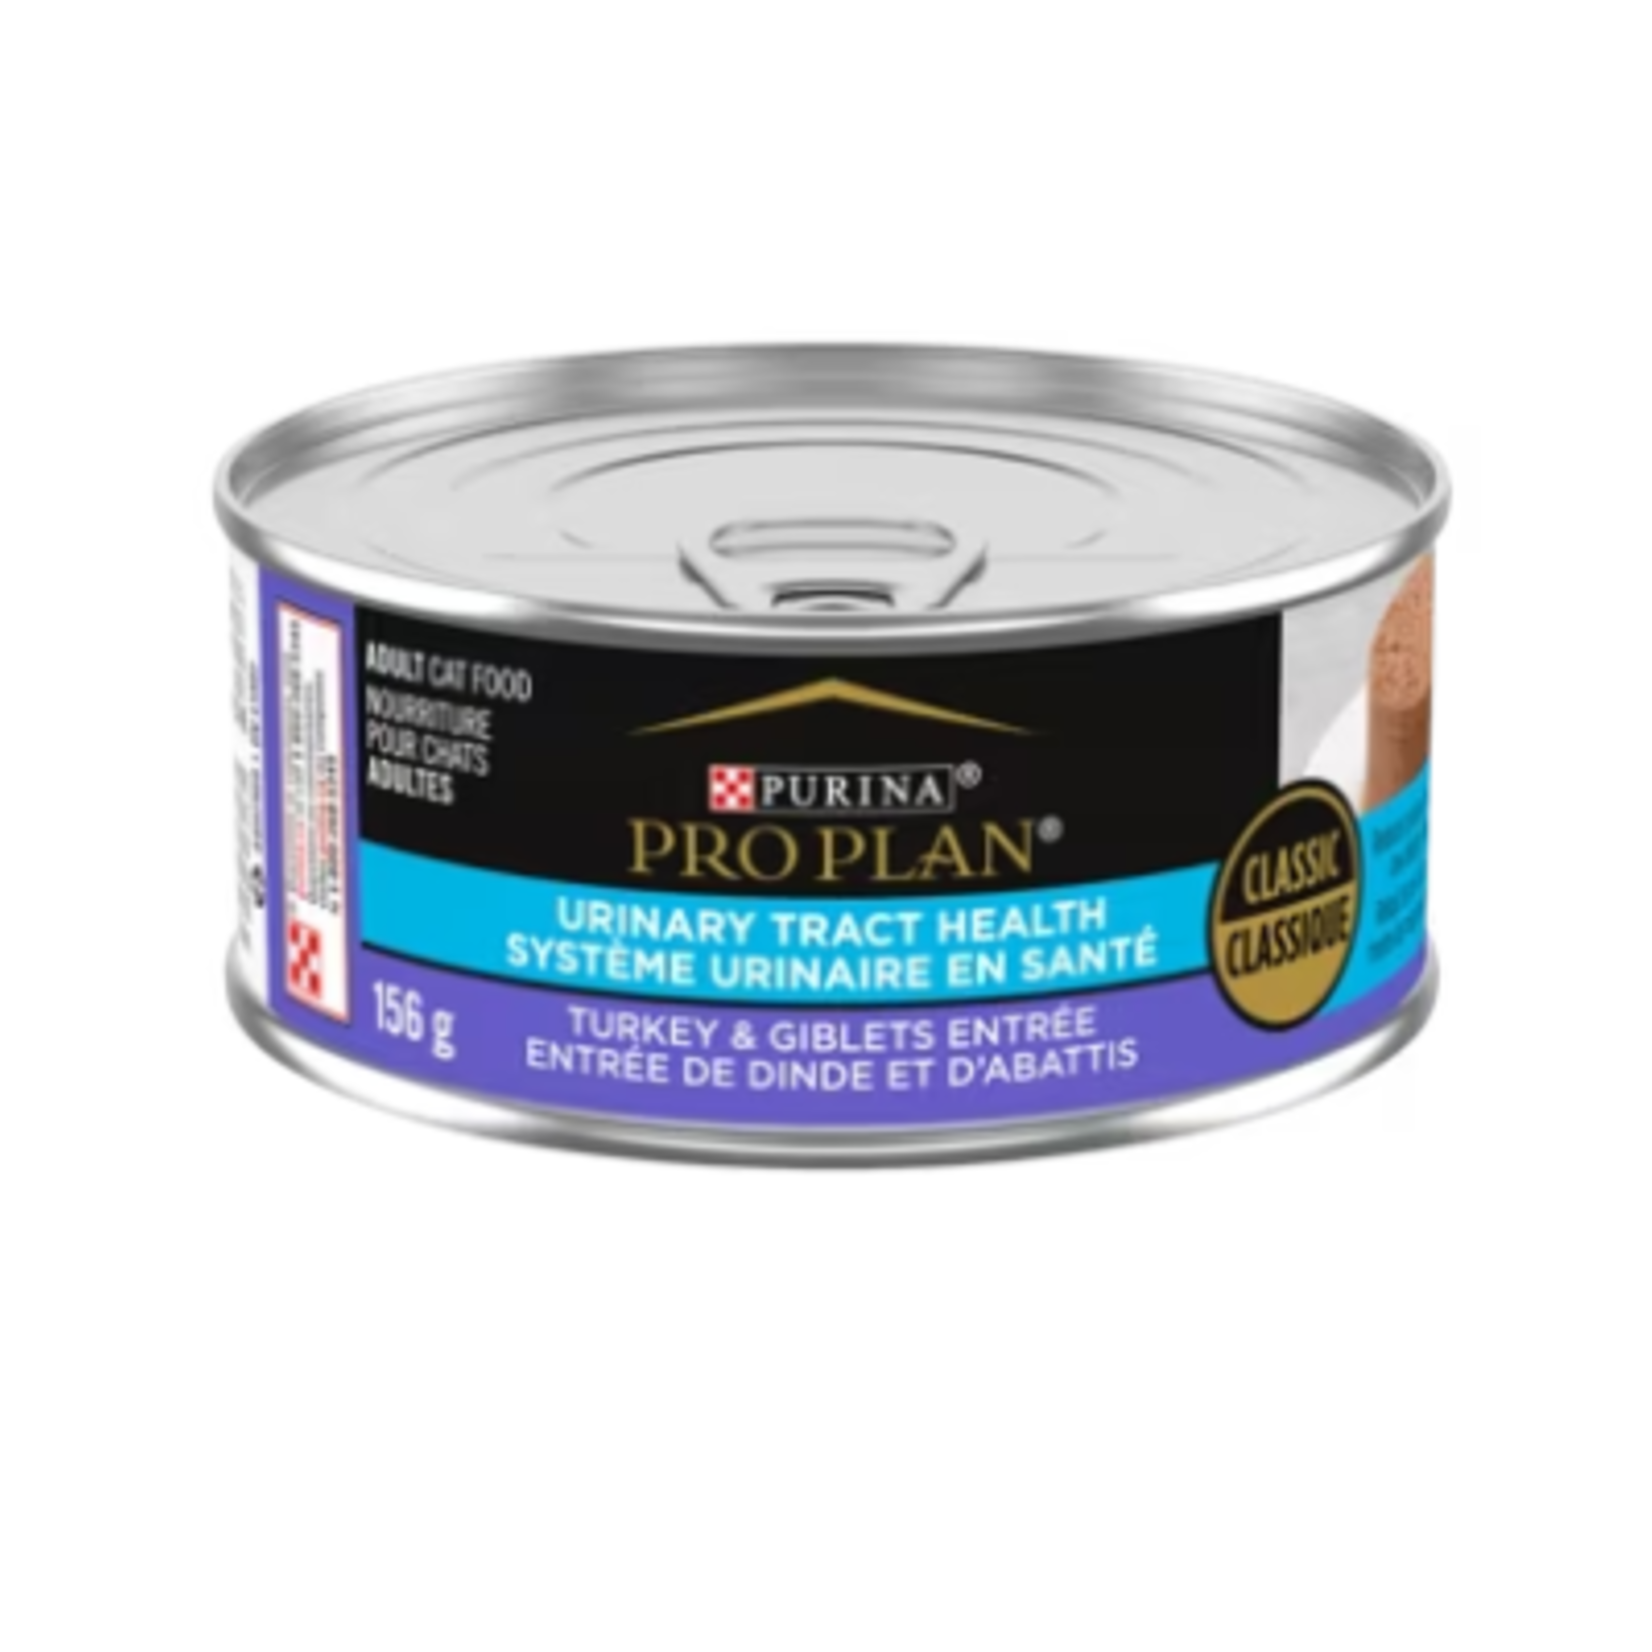 Purina ProPlan - Cat Urinary Tract Health - Turkey & Giblets - 156 g